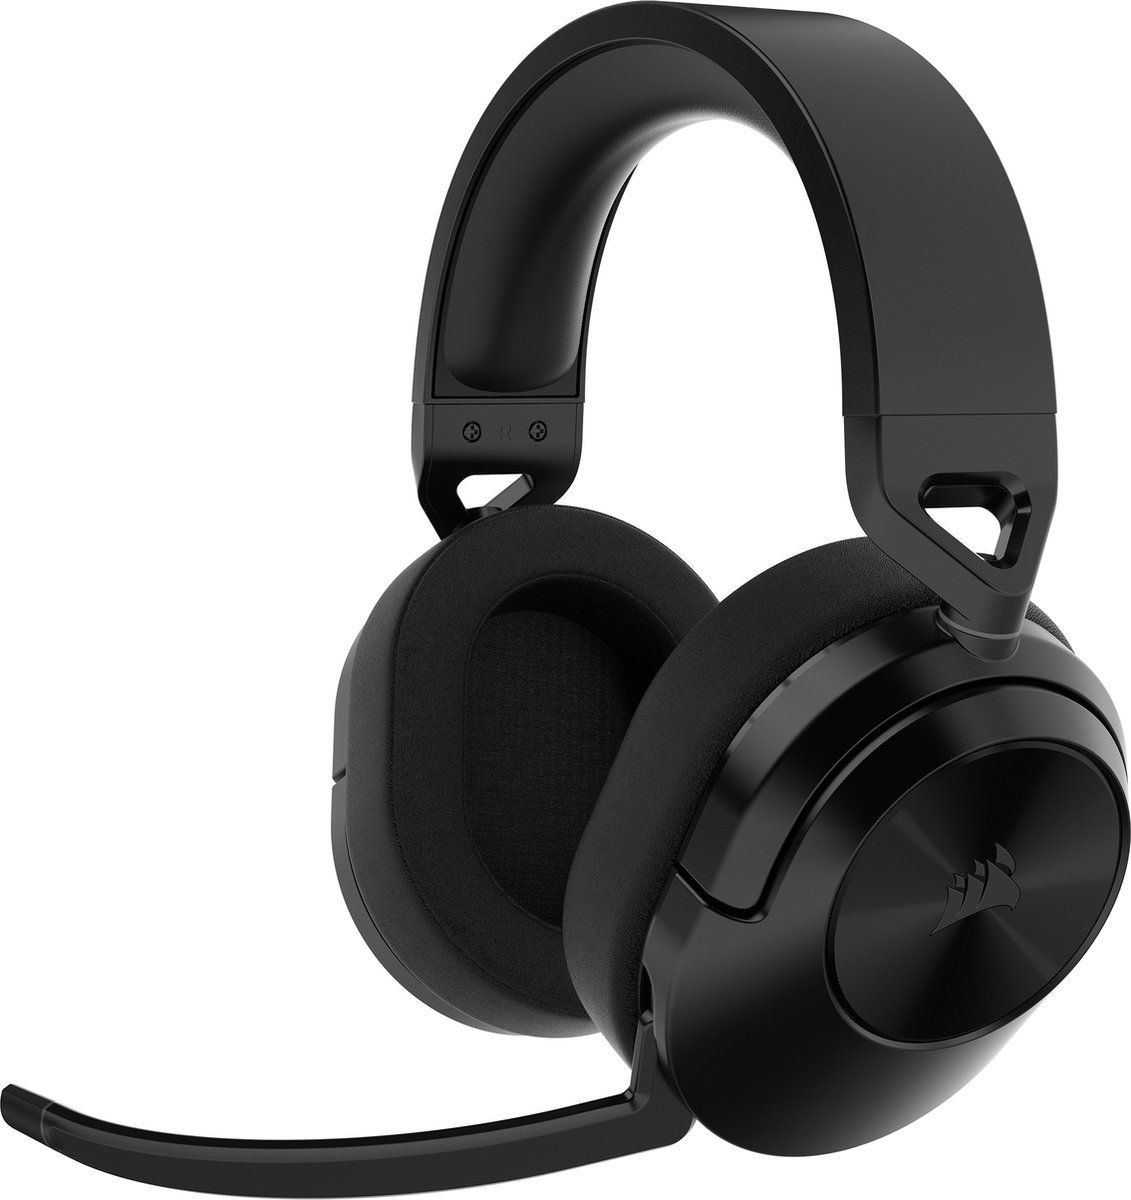 corsair-hs55-dolby-audio-71-pc-surround-wireless-gaming-headset-carbon-pcmacps4ps5